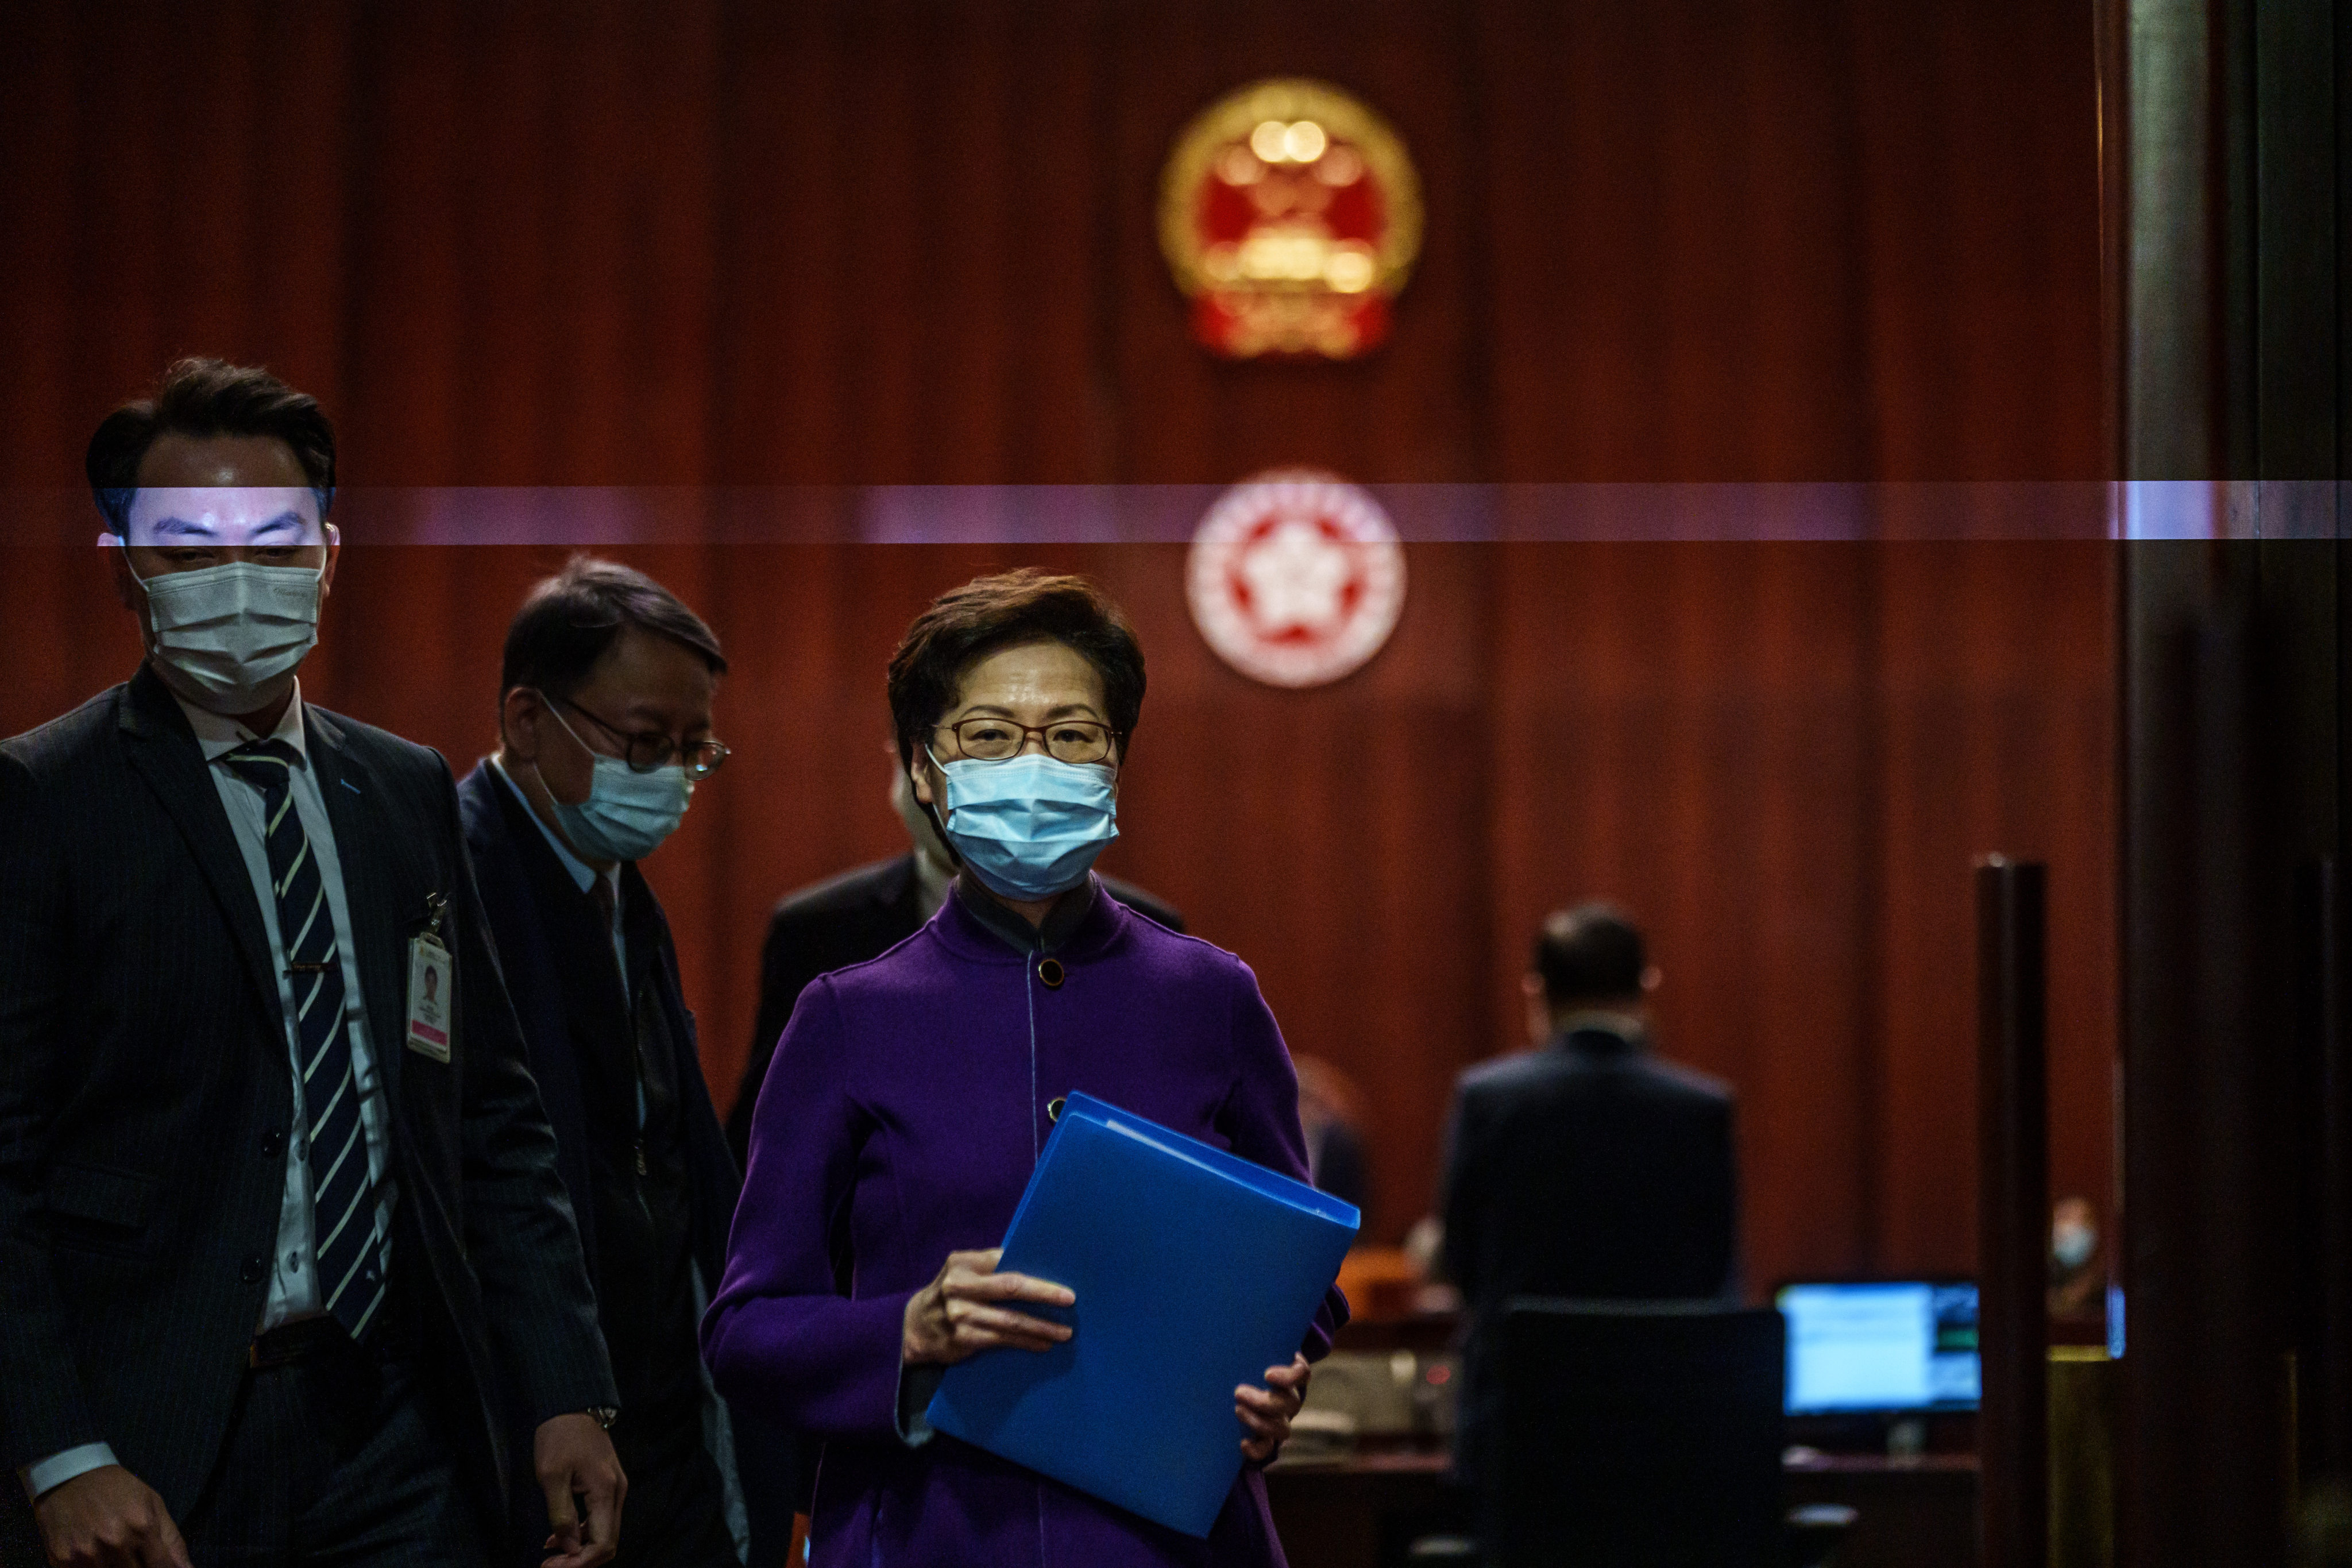 Outgoing Chief Executive Carrie Lam leaves the Legislative Council following a Q&A session on January 12. Photo: Bloomberg